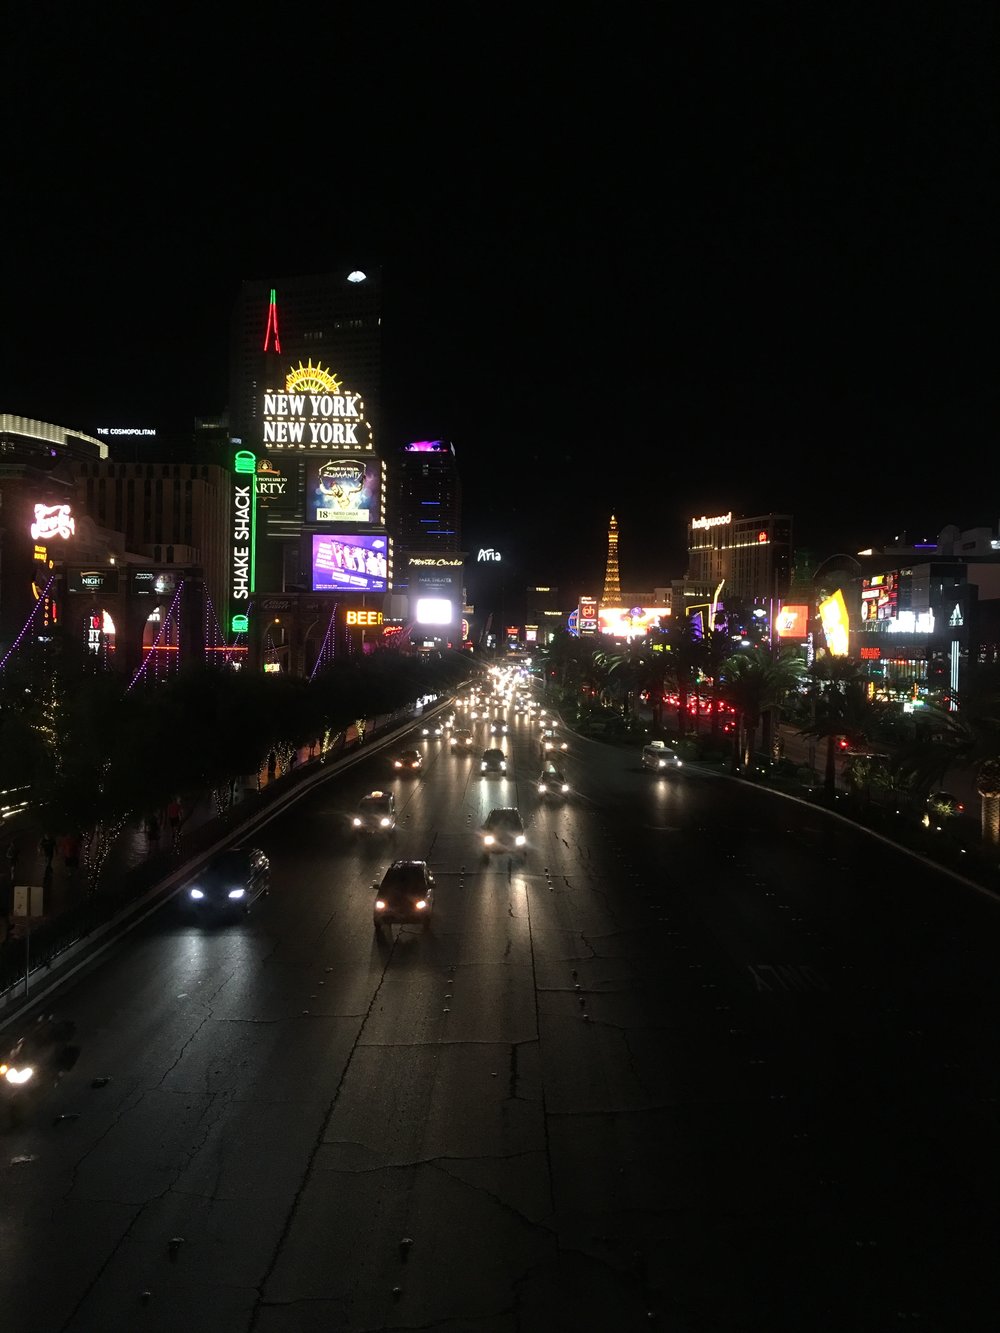 The strip at night